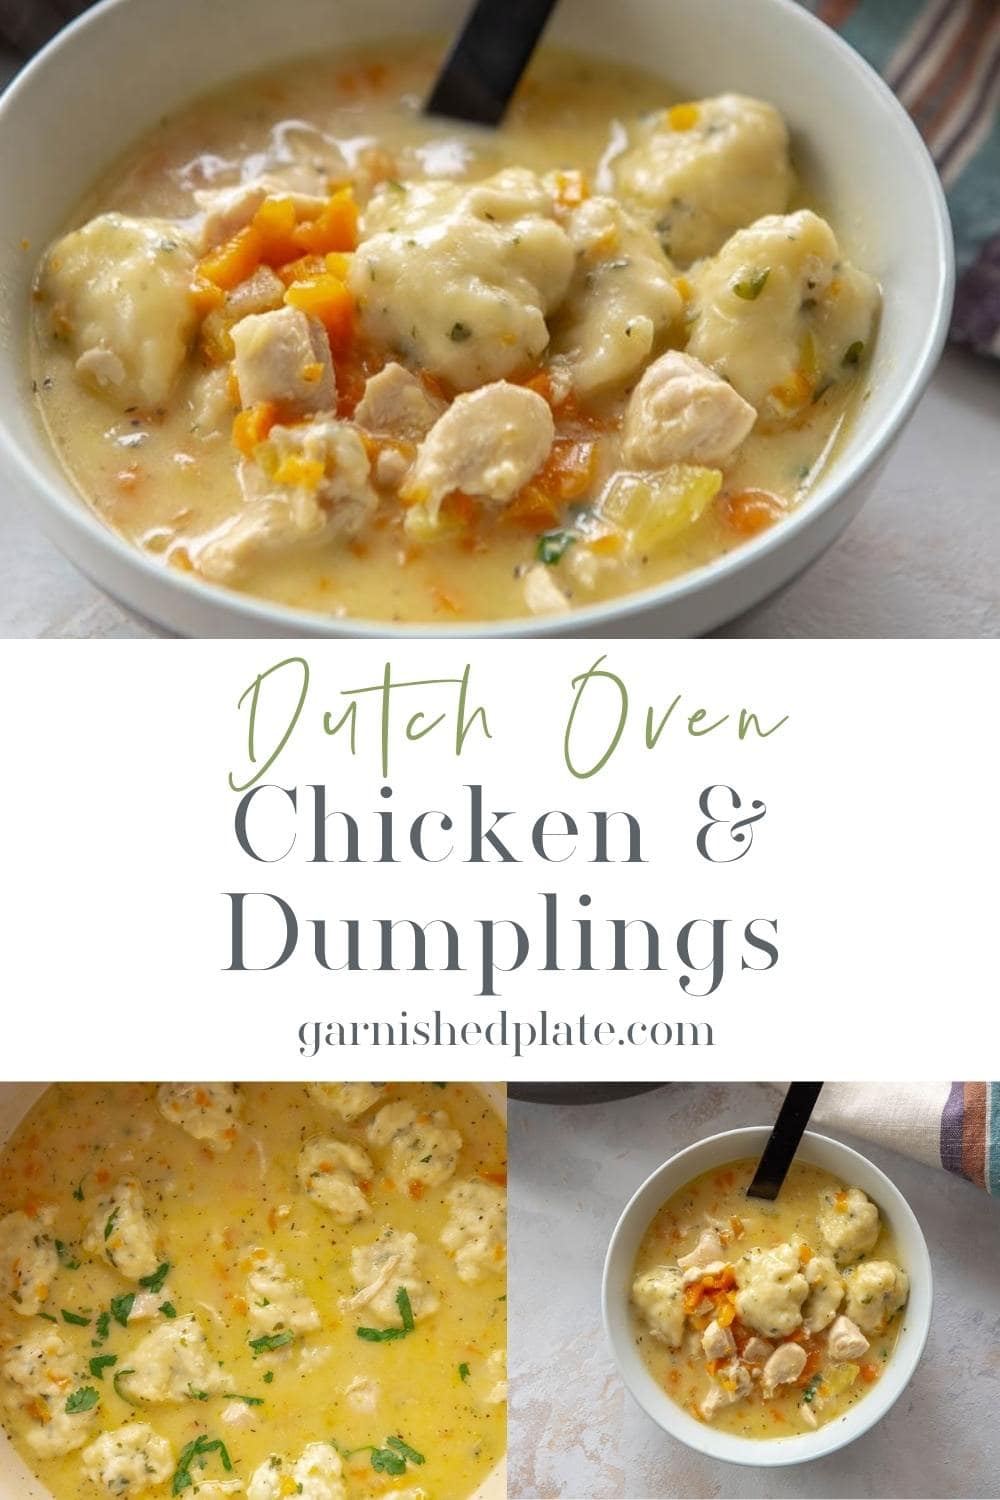 Dutch Oven Chicken and Dumplings - Garnished Plate